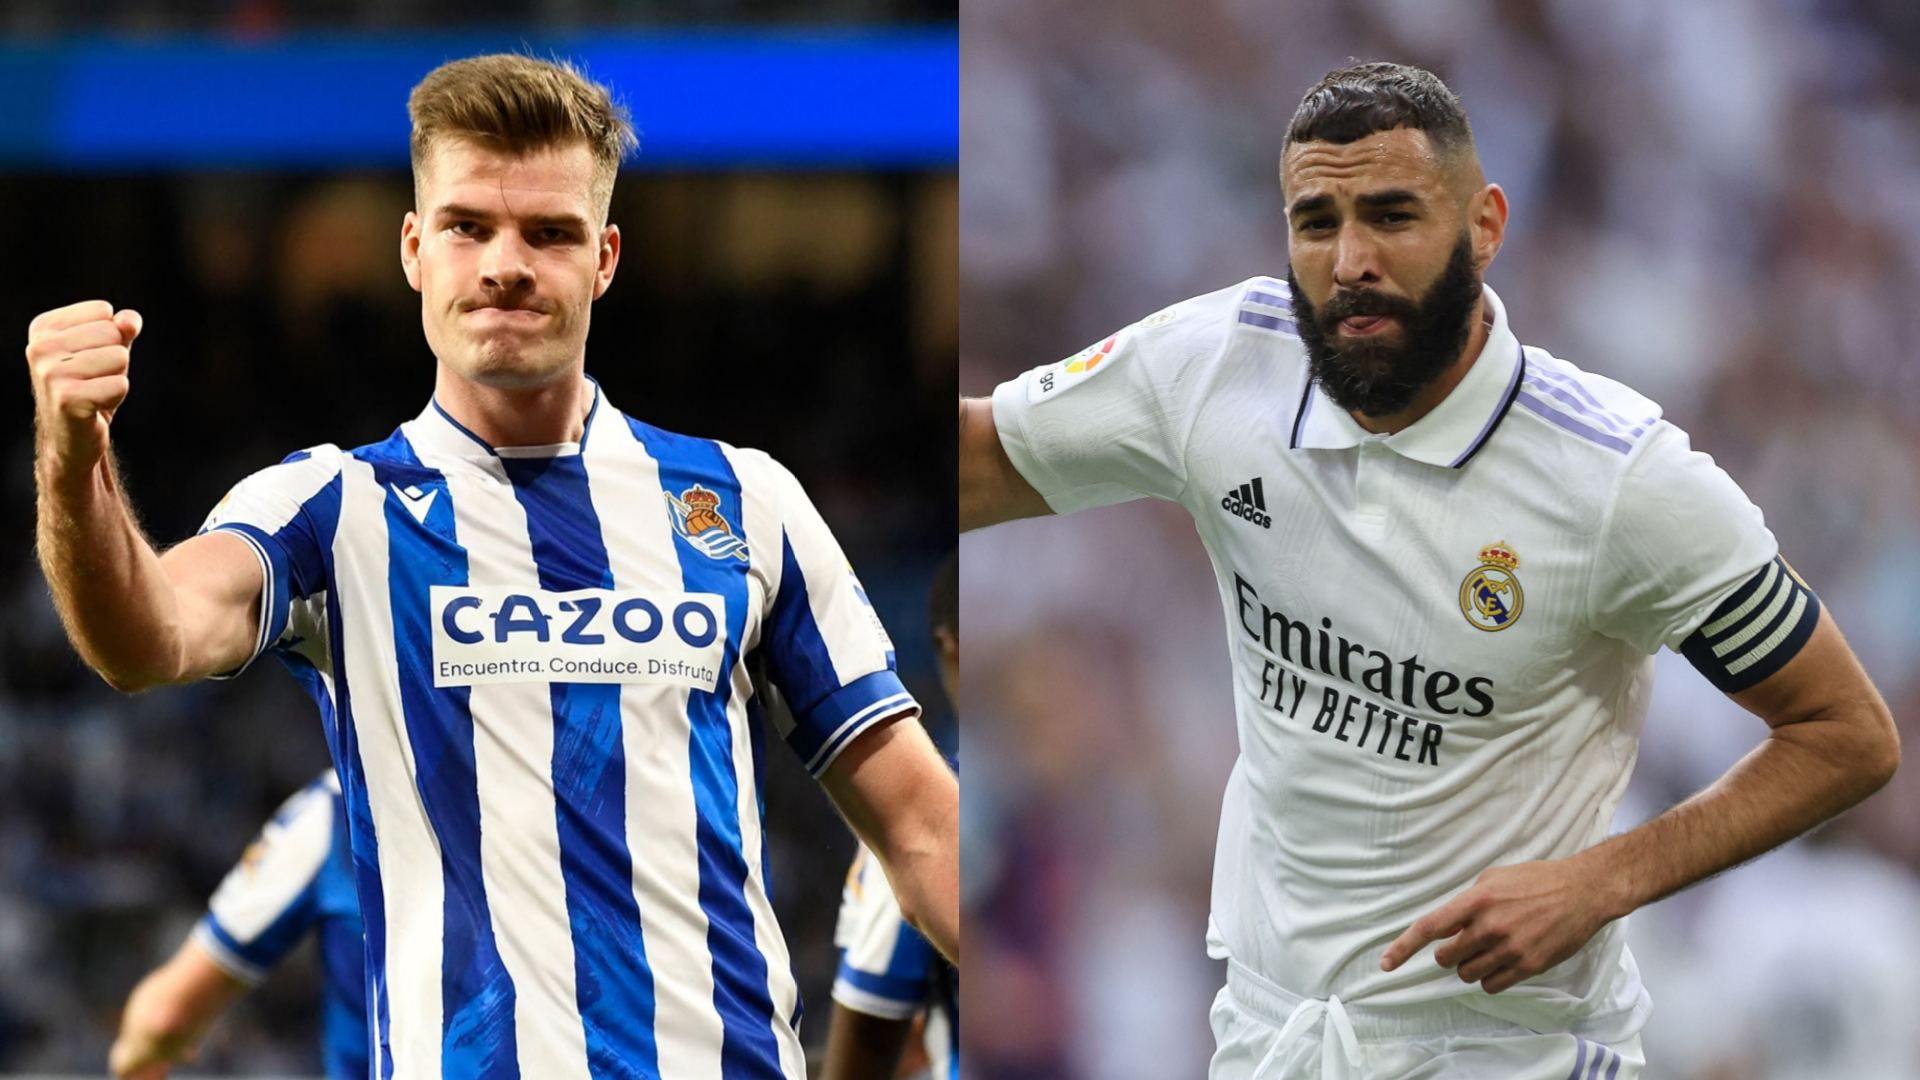 Real Sociedad vs Real Madrid Where to watch the match online, live stream, TV channels and kick-off time Goal US